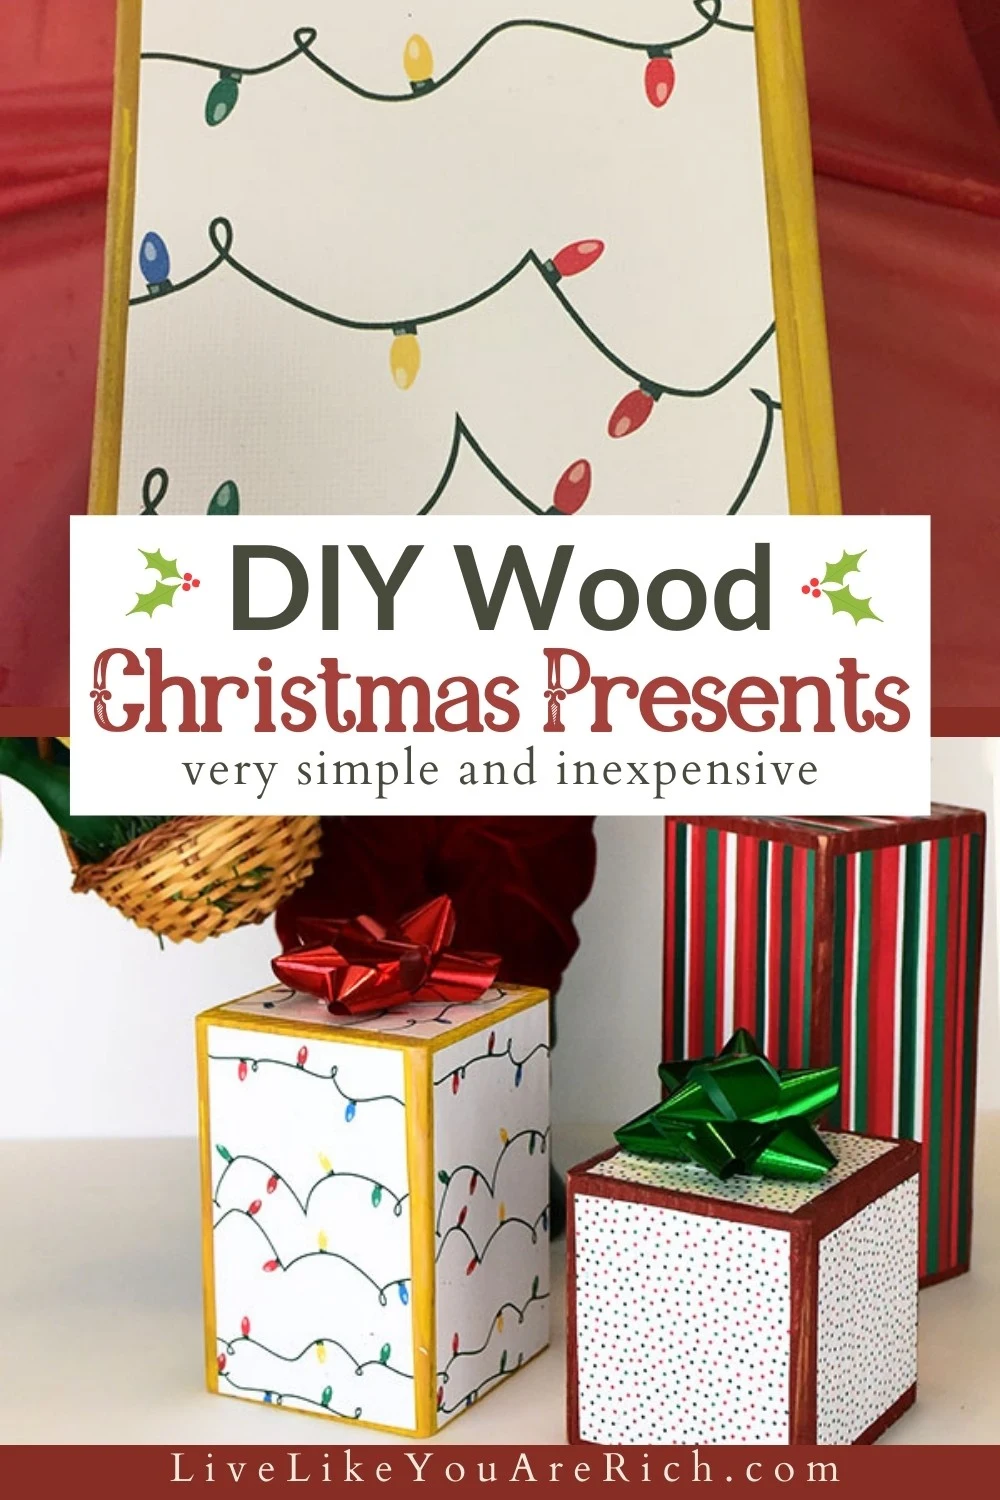 I made these D.I.Y. Wood Christmas Presents. They are very simple and inexpensive. Further, they are durable and will hold up for years—even with little kids in the house. Standing alone they look great. I also really like the wood Christmas presents displayed next to my Santa. #christmas #christmasdecor